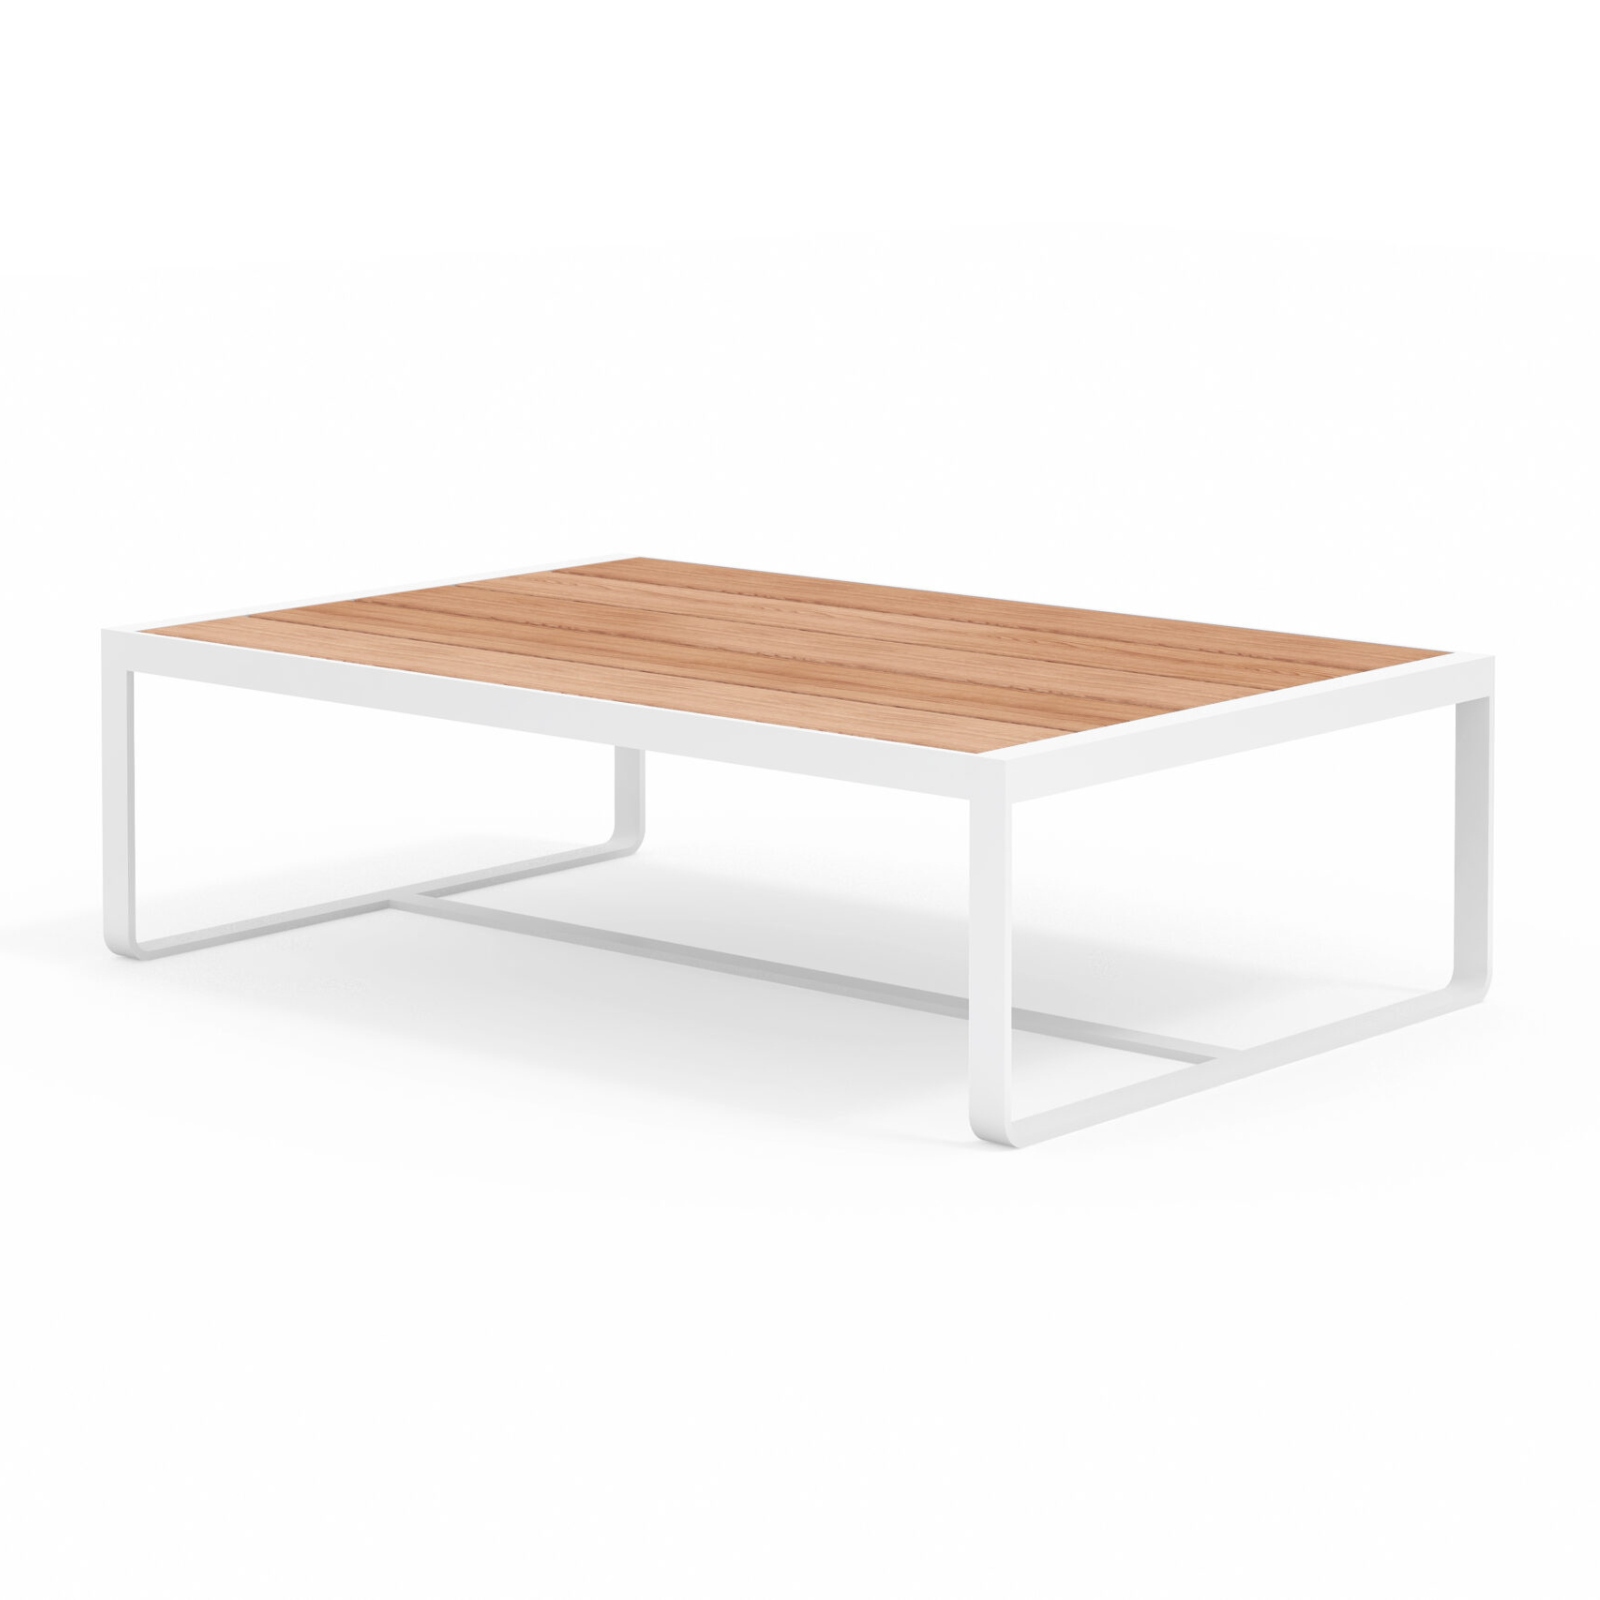 Sit | Outdoor Low Table